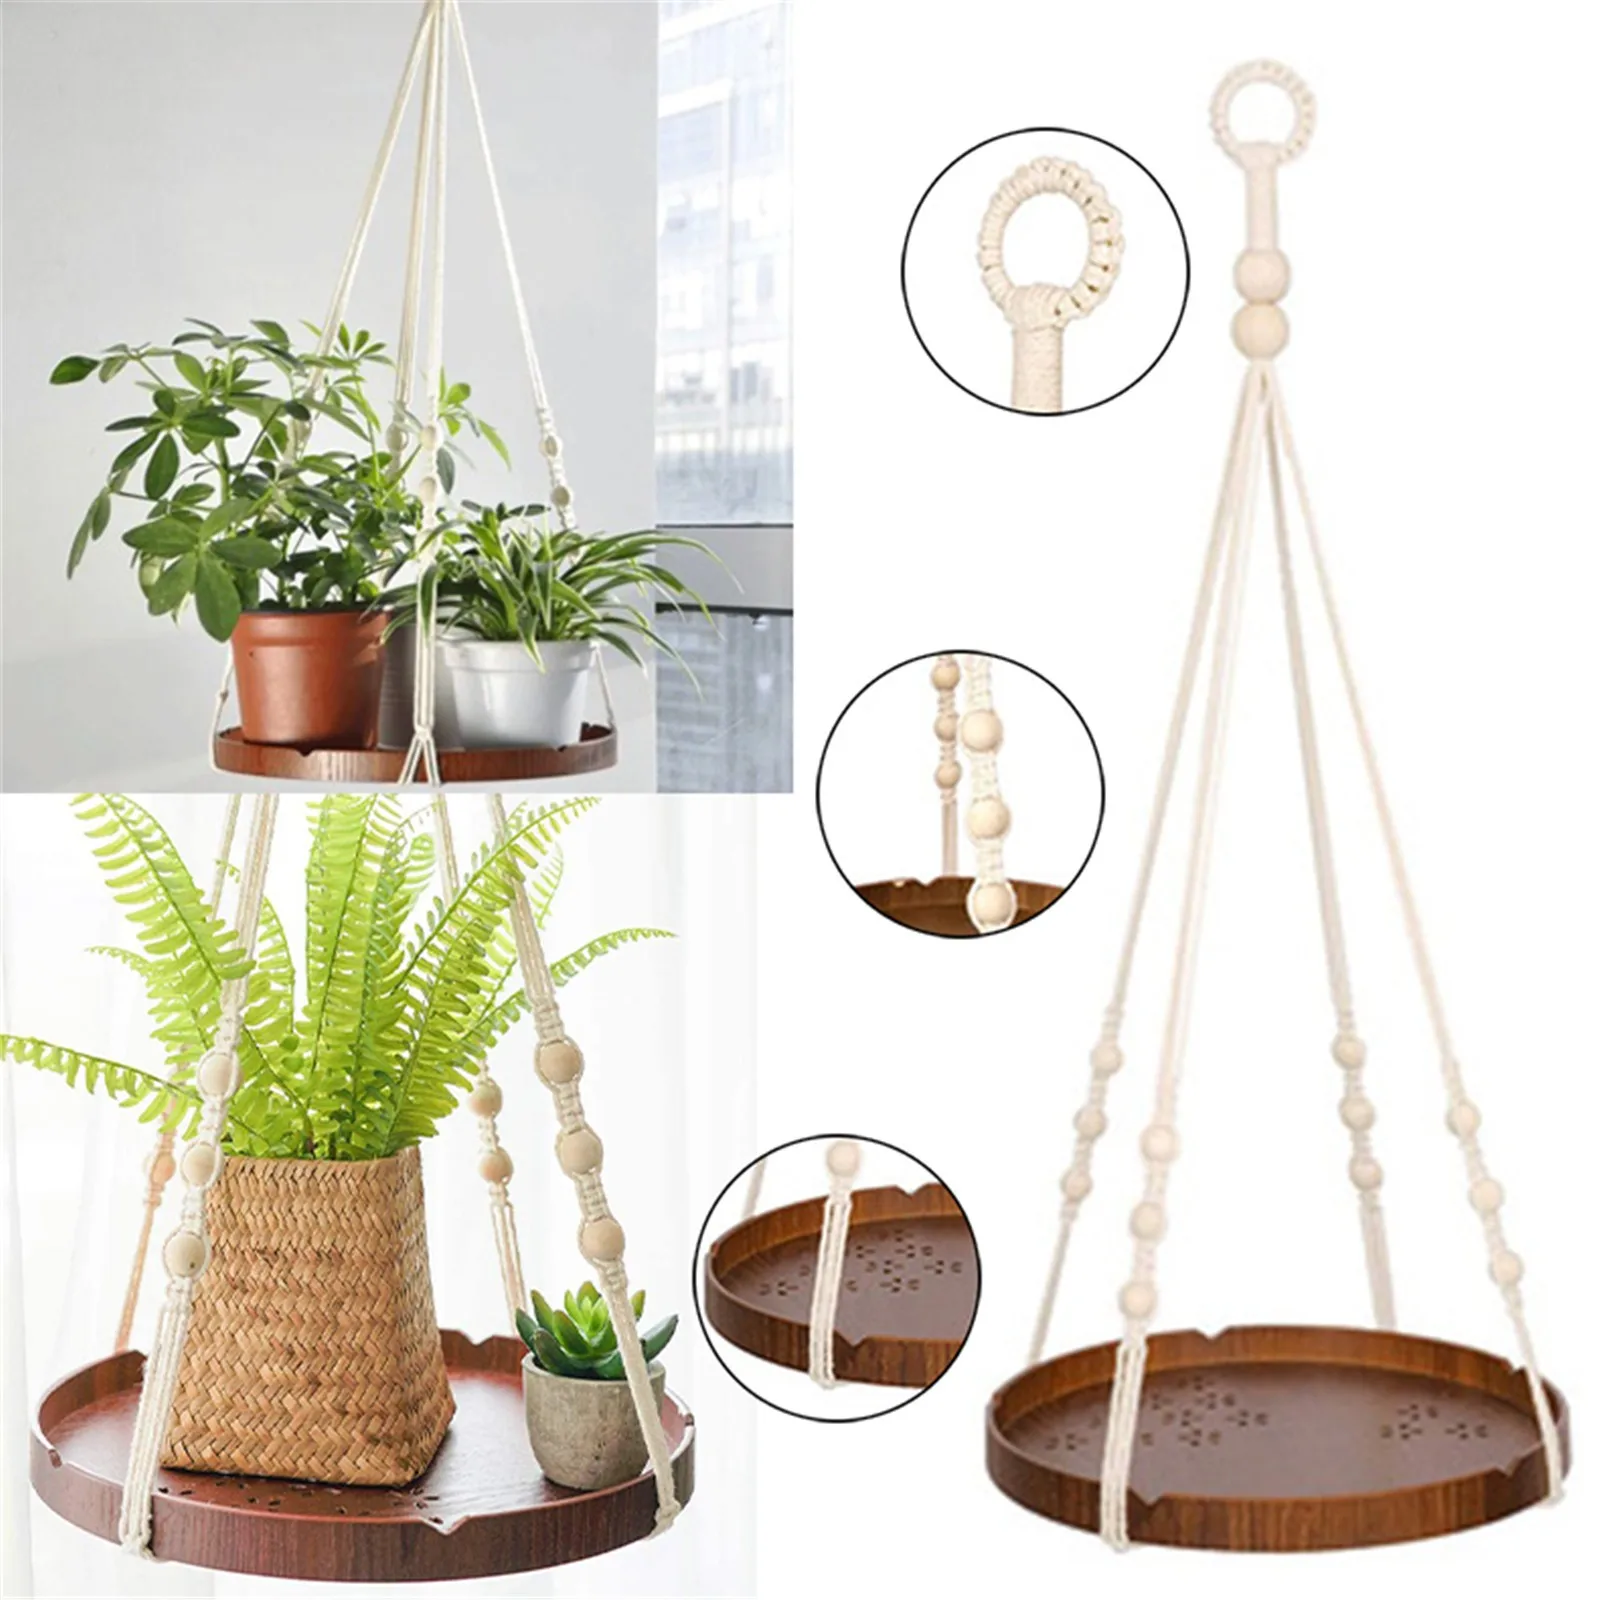 Small Herbs TQVAI Indoor Macrame Plant Hanging Shelf with Hanger Hook Decorative Flower Pot Holder Succulents Flowers Brown Boho Chic Bohemian Home Decor for Beloved Cactus 